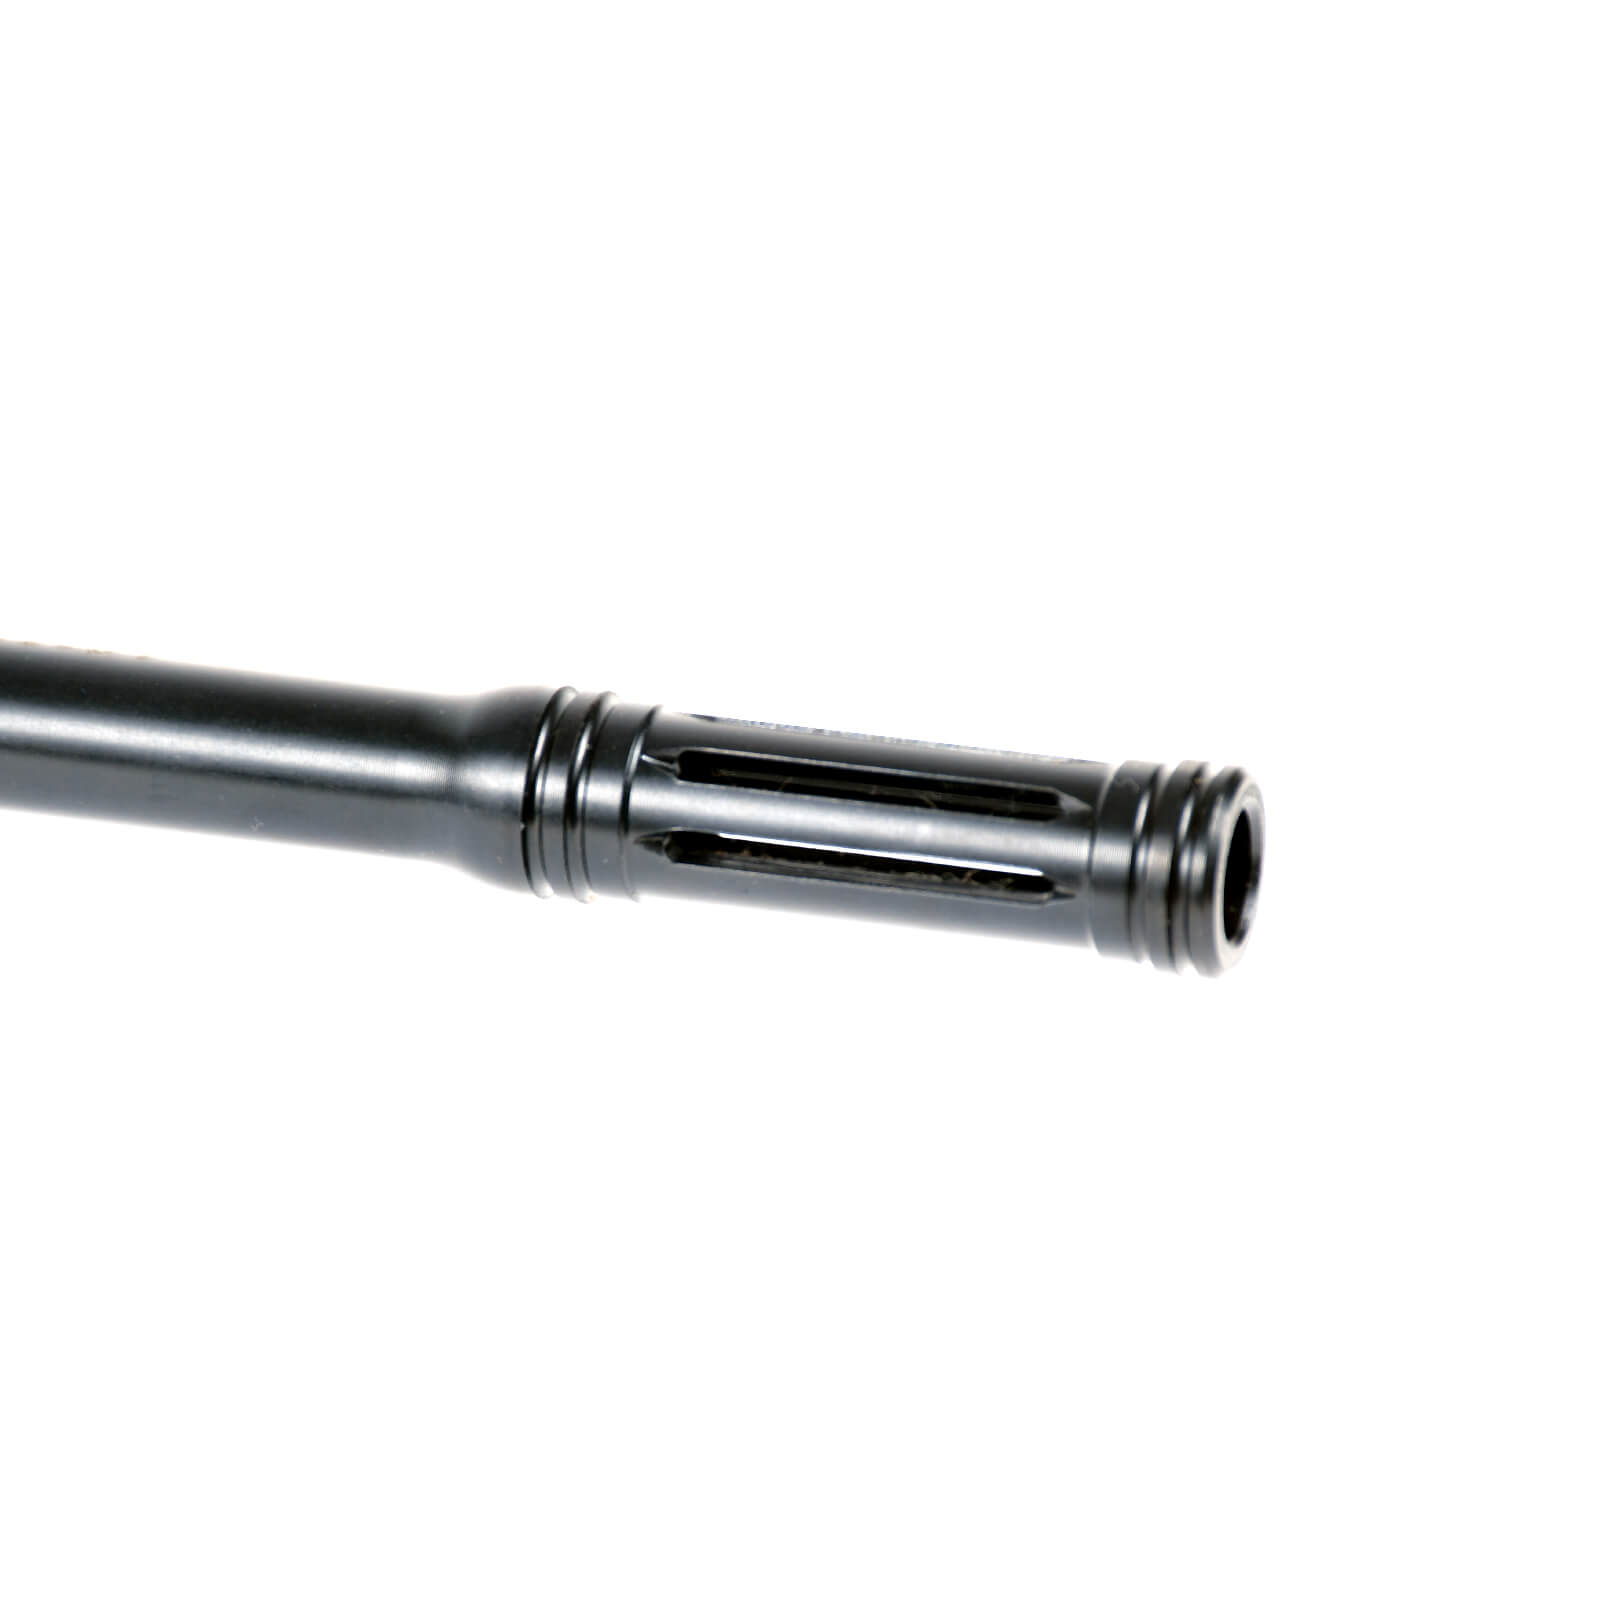 Faxon Firearms 16 Inch Overall Pencil Barrel with Integrated Flash Hider - 5.56 NATO